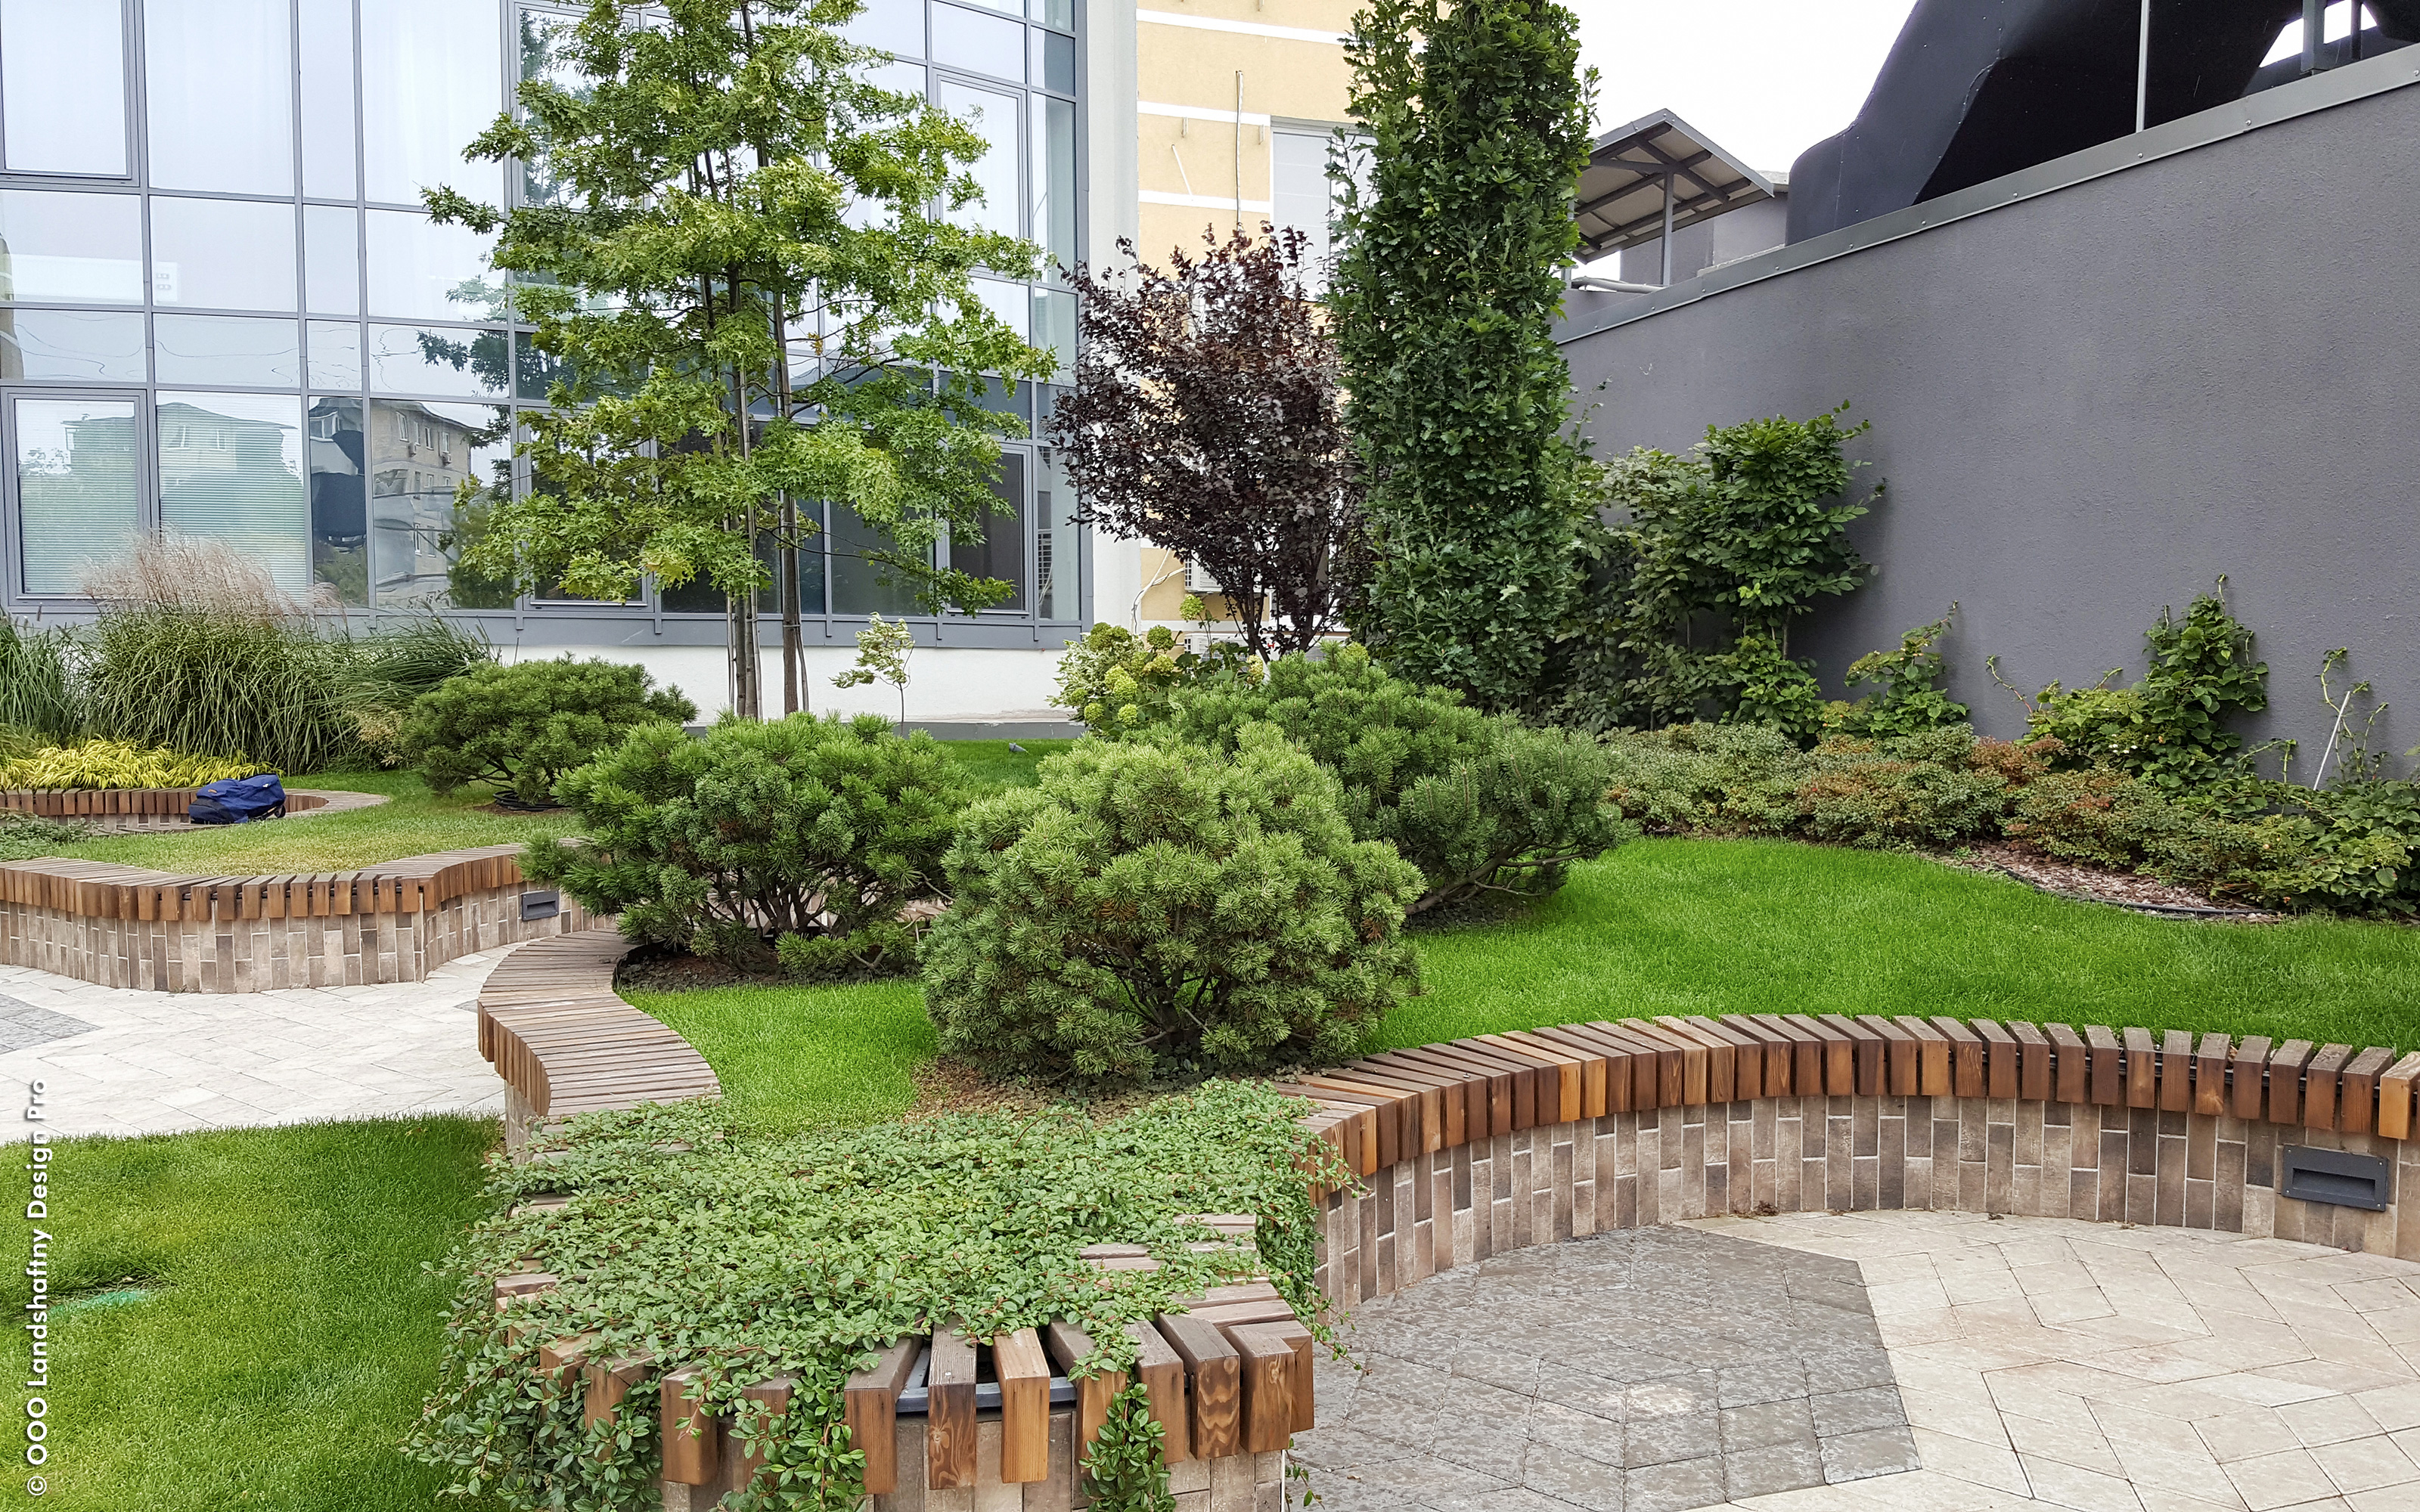 Roof garden with lawn, small trees and circular wooden benches